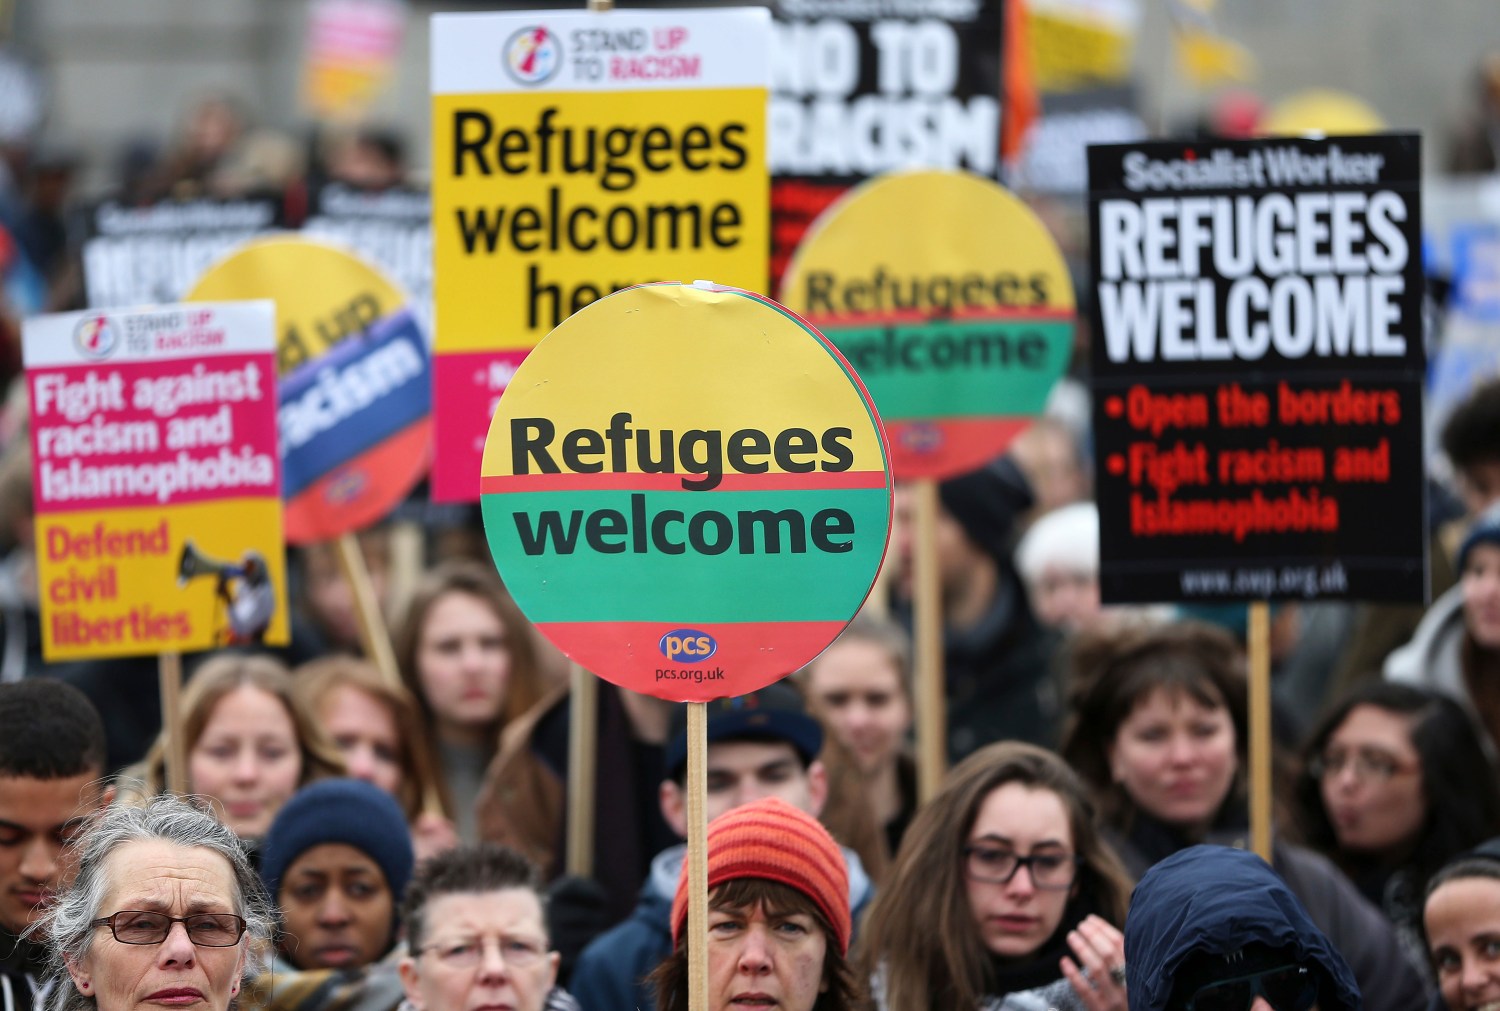 Demonstrators hold placards during a refugees welcome march in London, Britain March 19, 2016. REUTERS/Neil Hall - RTSB7L0